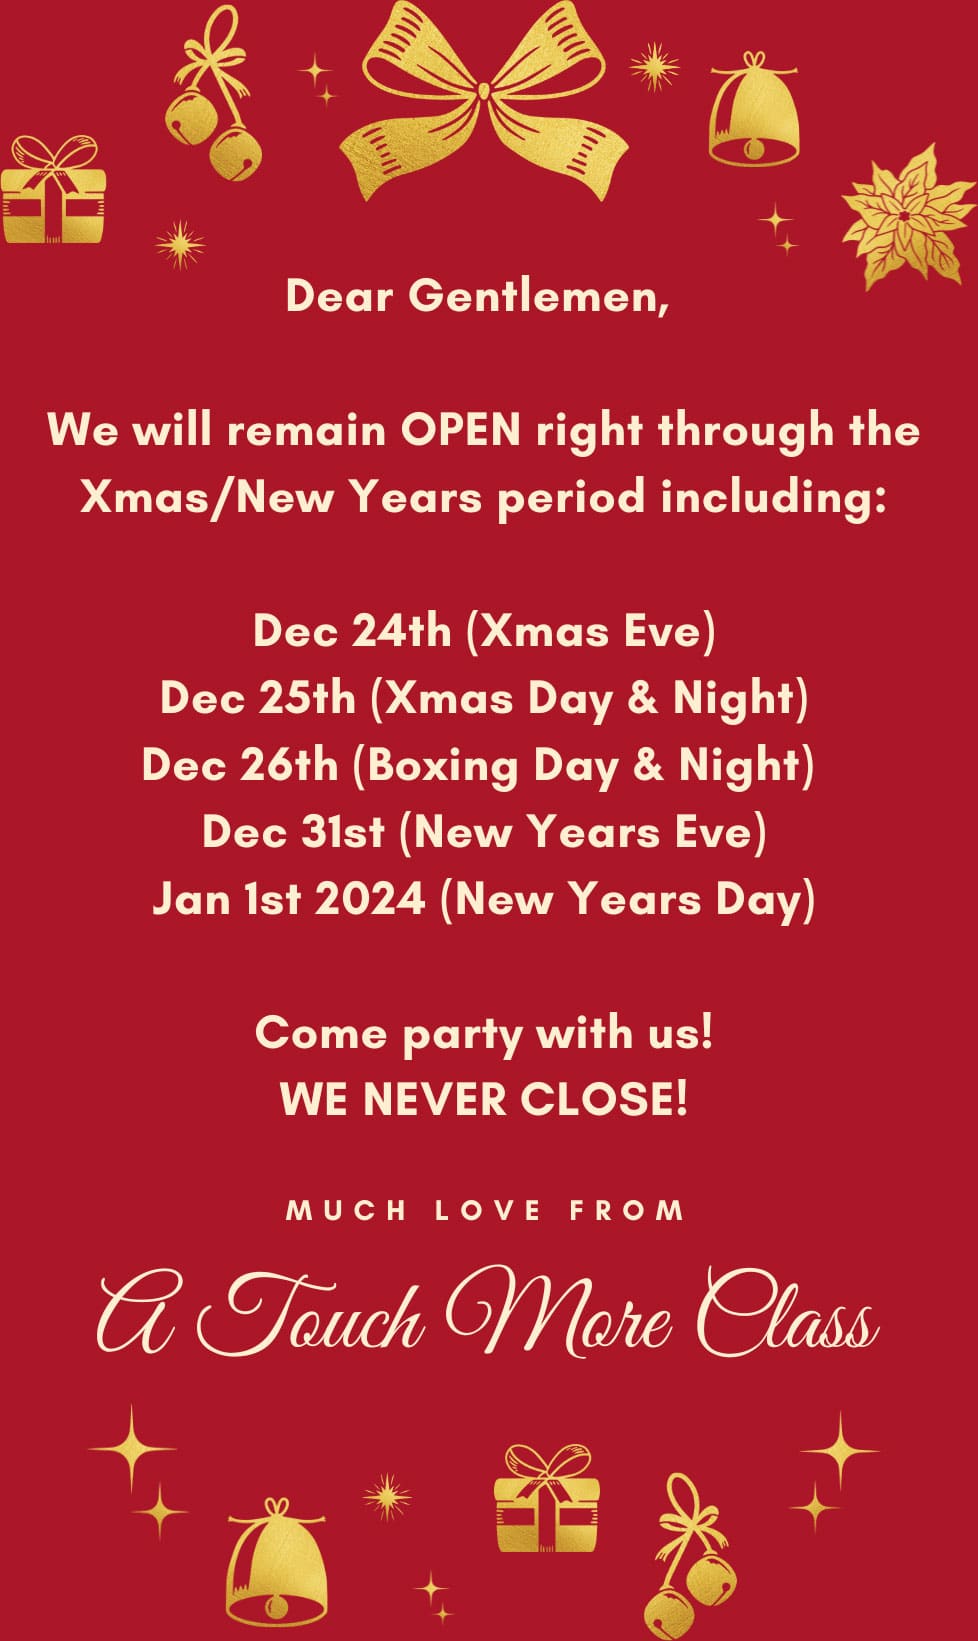 Holiday opening hours notice